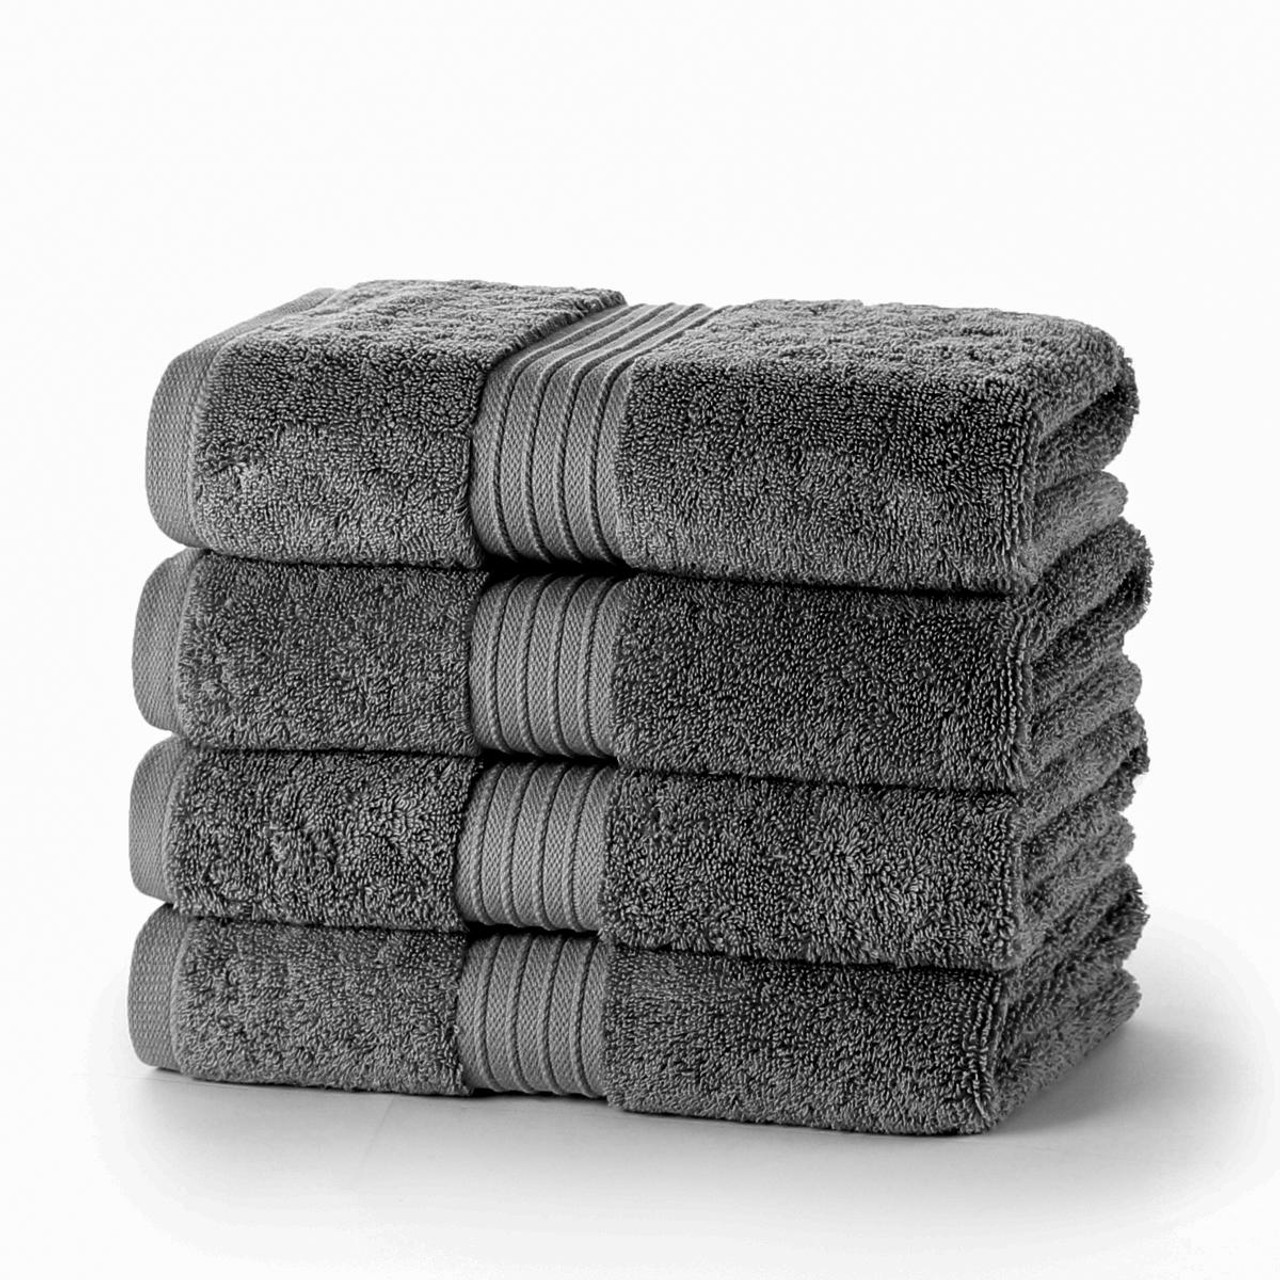 CB CASA BELLA The ultimate linen 700 GSM PACK OF 12 100% COTTON FACE CLOTH TOWELS FLANNELS WASH CLOTH_Black 